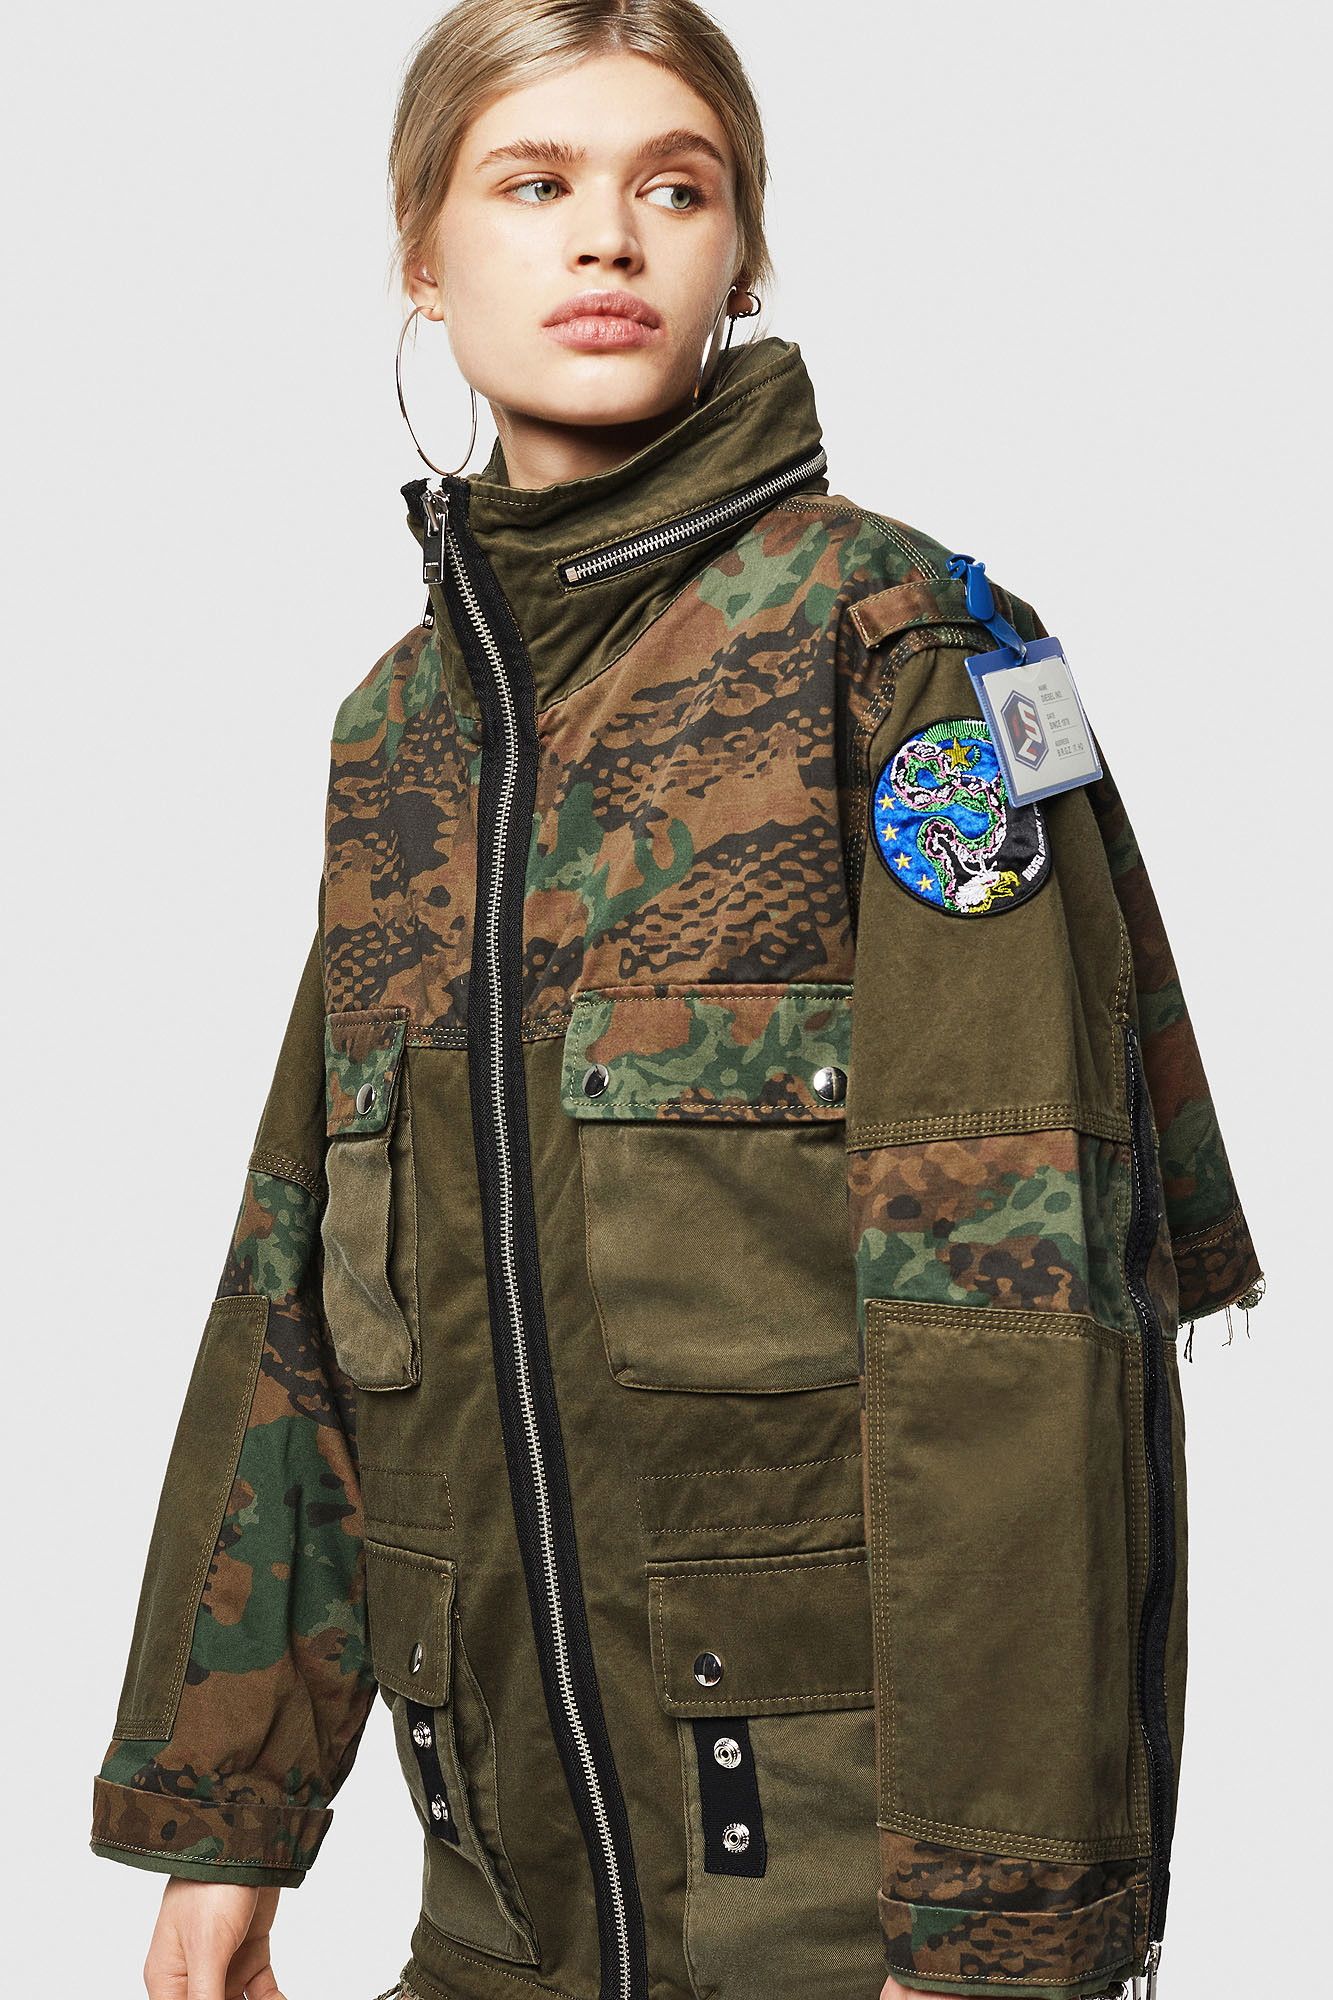 Brand: Diesel
Gender: Women
Type: Jackets
Season: All seasons

PRODUCT DETAIL
• Color: green
• Pattern: camouflage
• Fastening: with zip
• Sleeves: long
• Collar: hood
• Pockets: front pockets

COMPOSITION AND MATERIAL
• Composition: -100% cotton 
•  Washing: machine wash at 30°